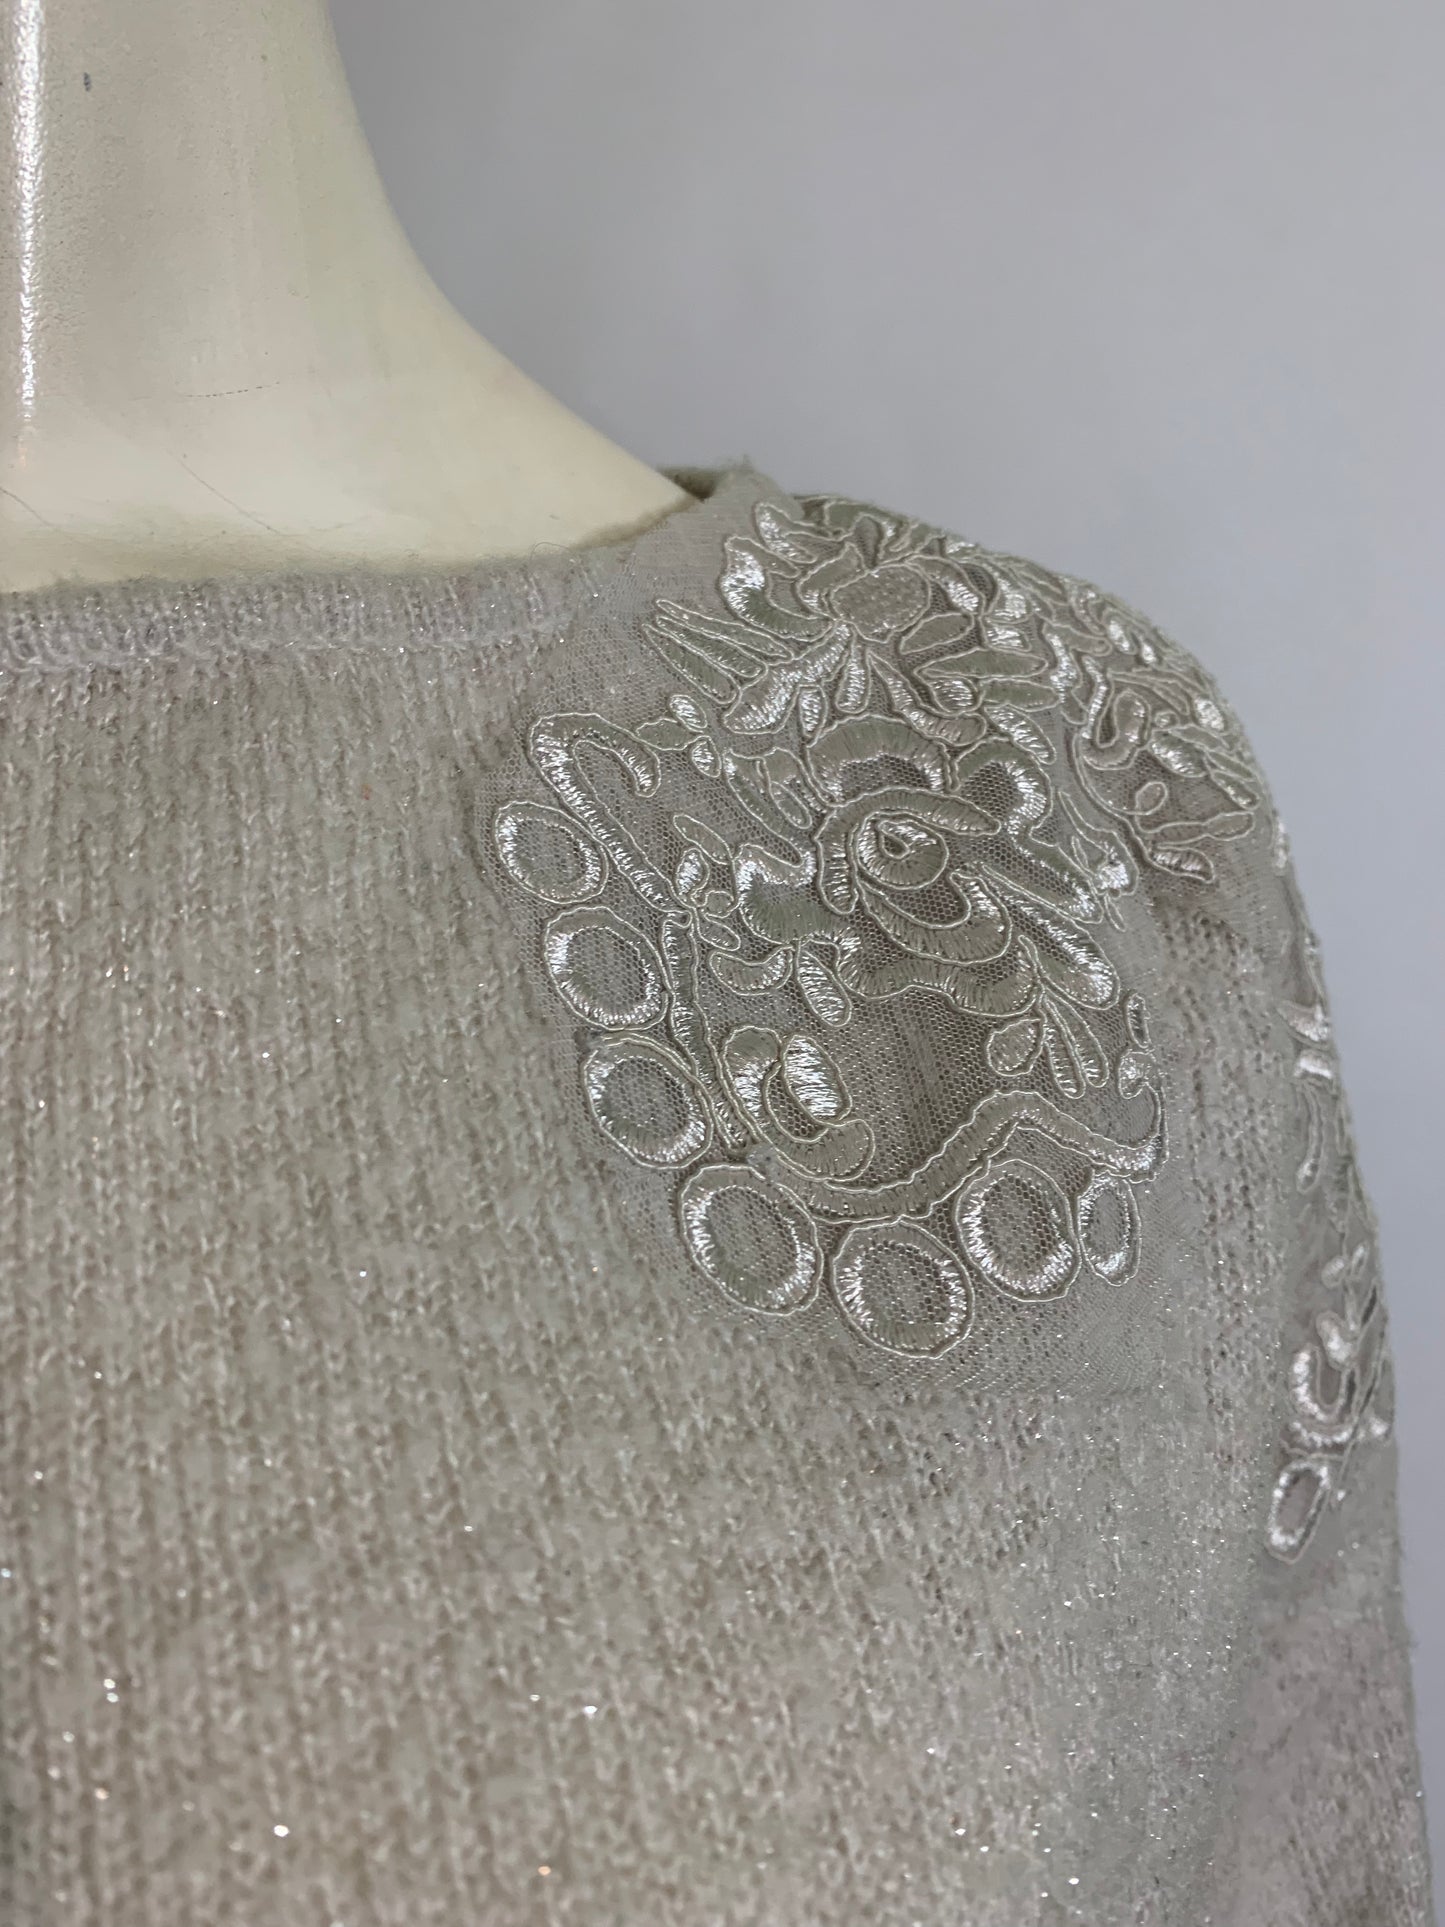 Silver Long Sleeved Beaded Sweater circa 1980s